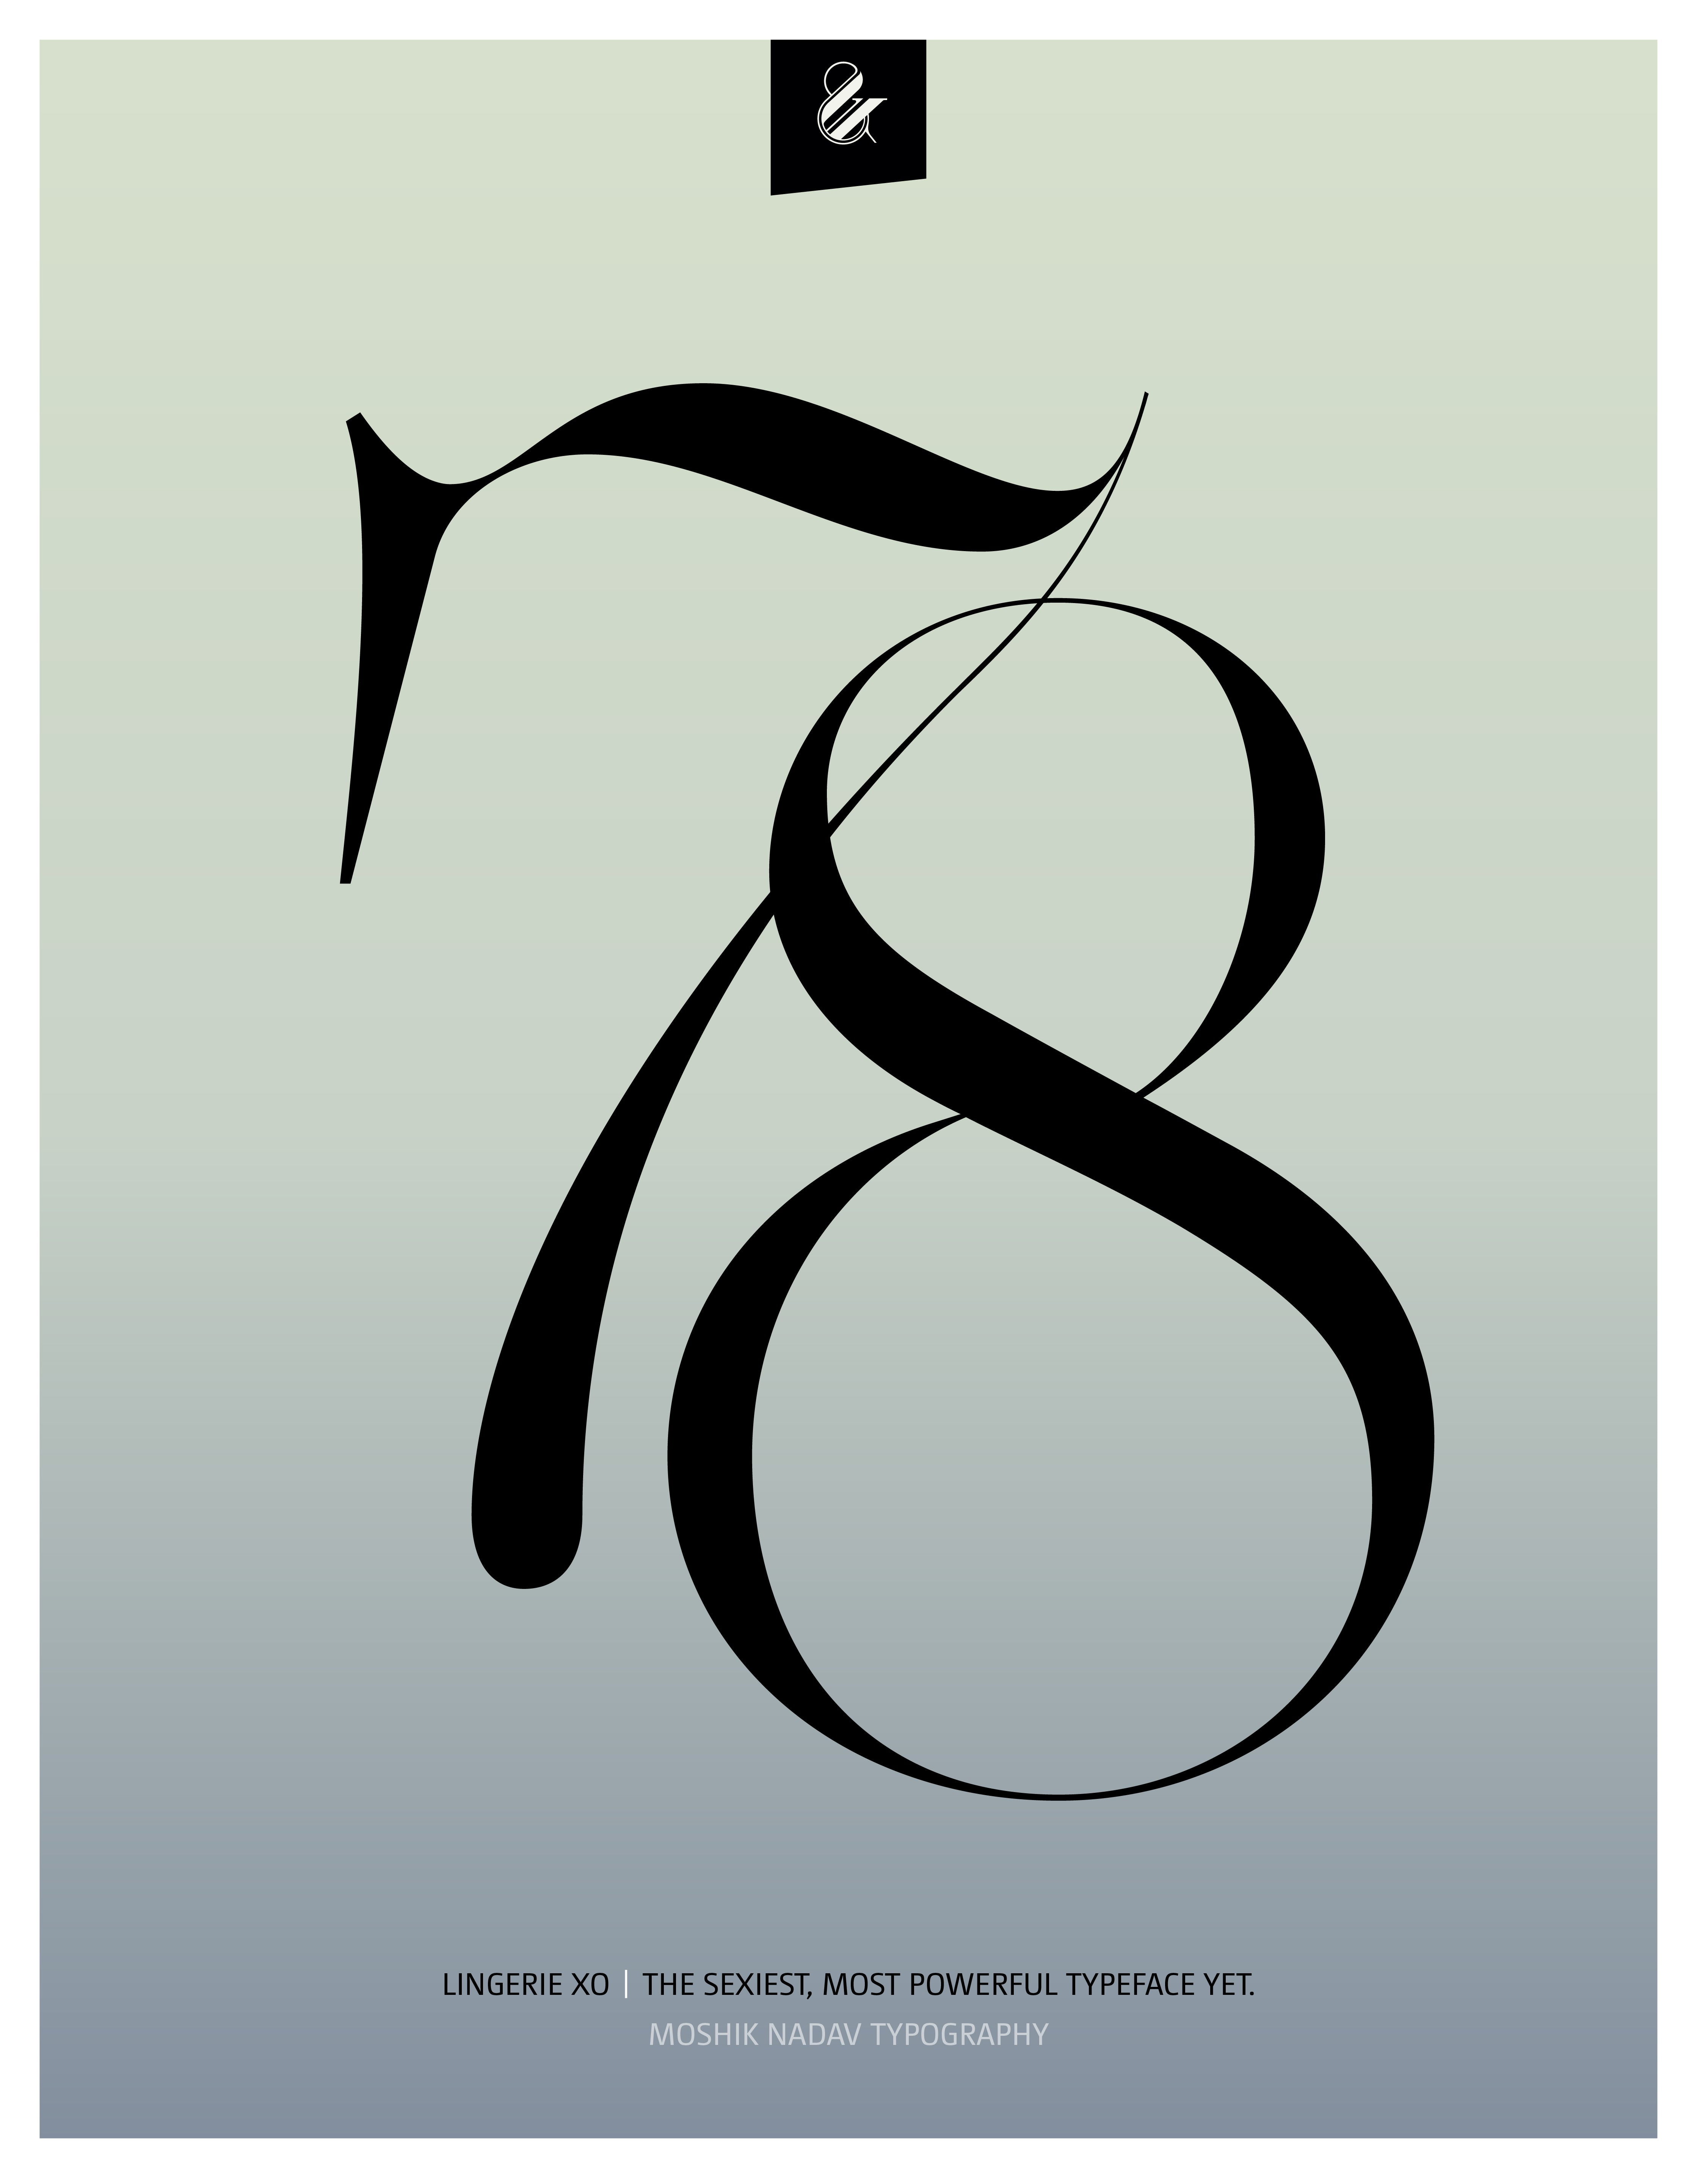 Sexy numbers 78 poster - designed with the sexy font Lingerie XO by Moshik Nadav Fashion Typography NYC